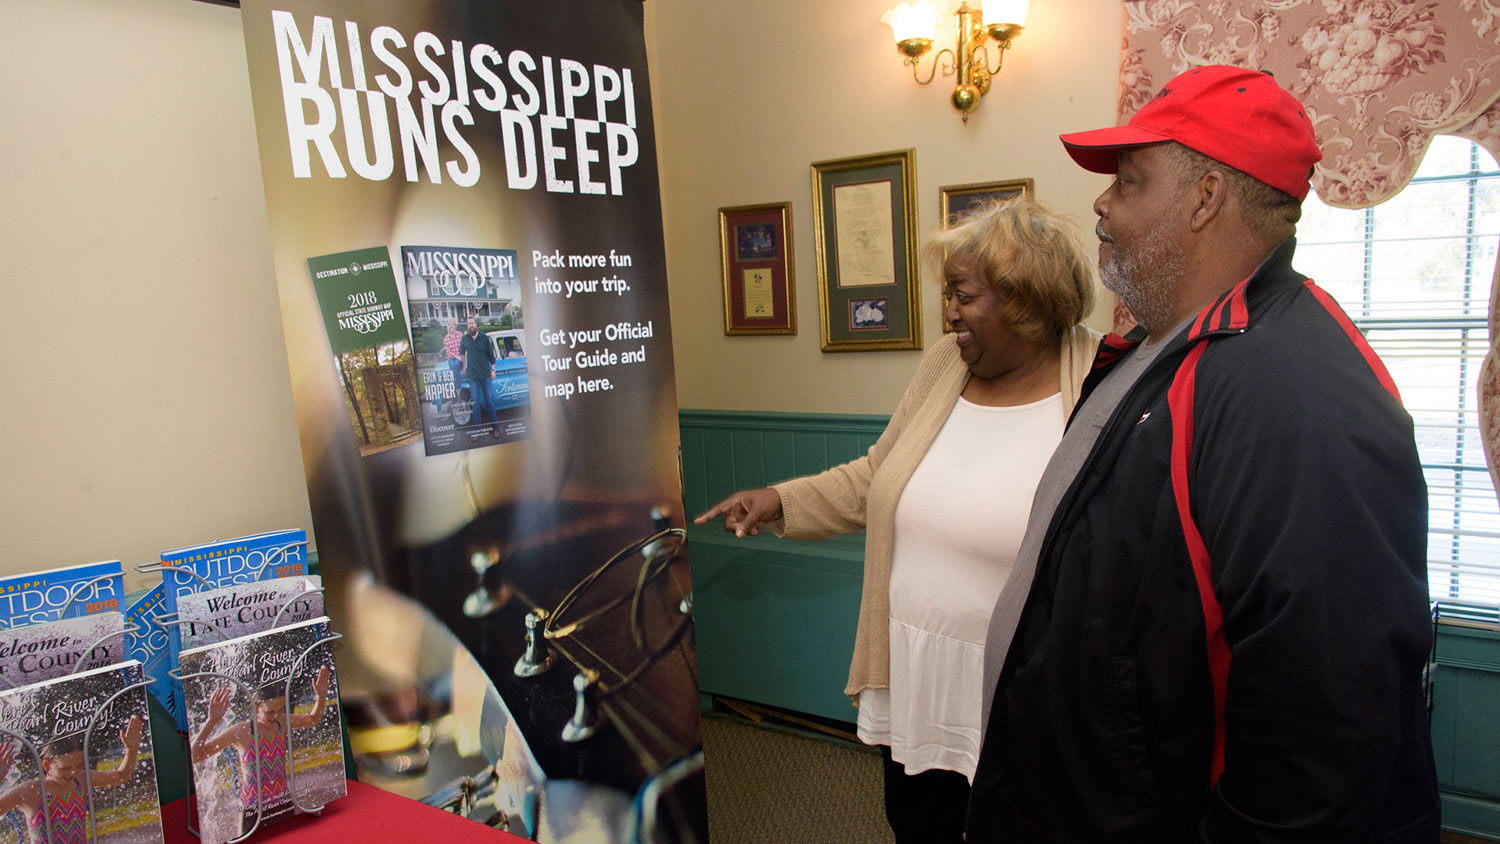 A man wearing a red hat stands next to a smiling woman pointing at a poster that says "Mississippi Runs Deep." 